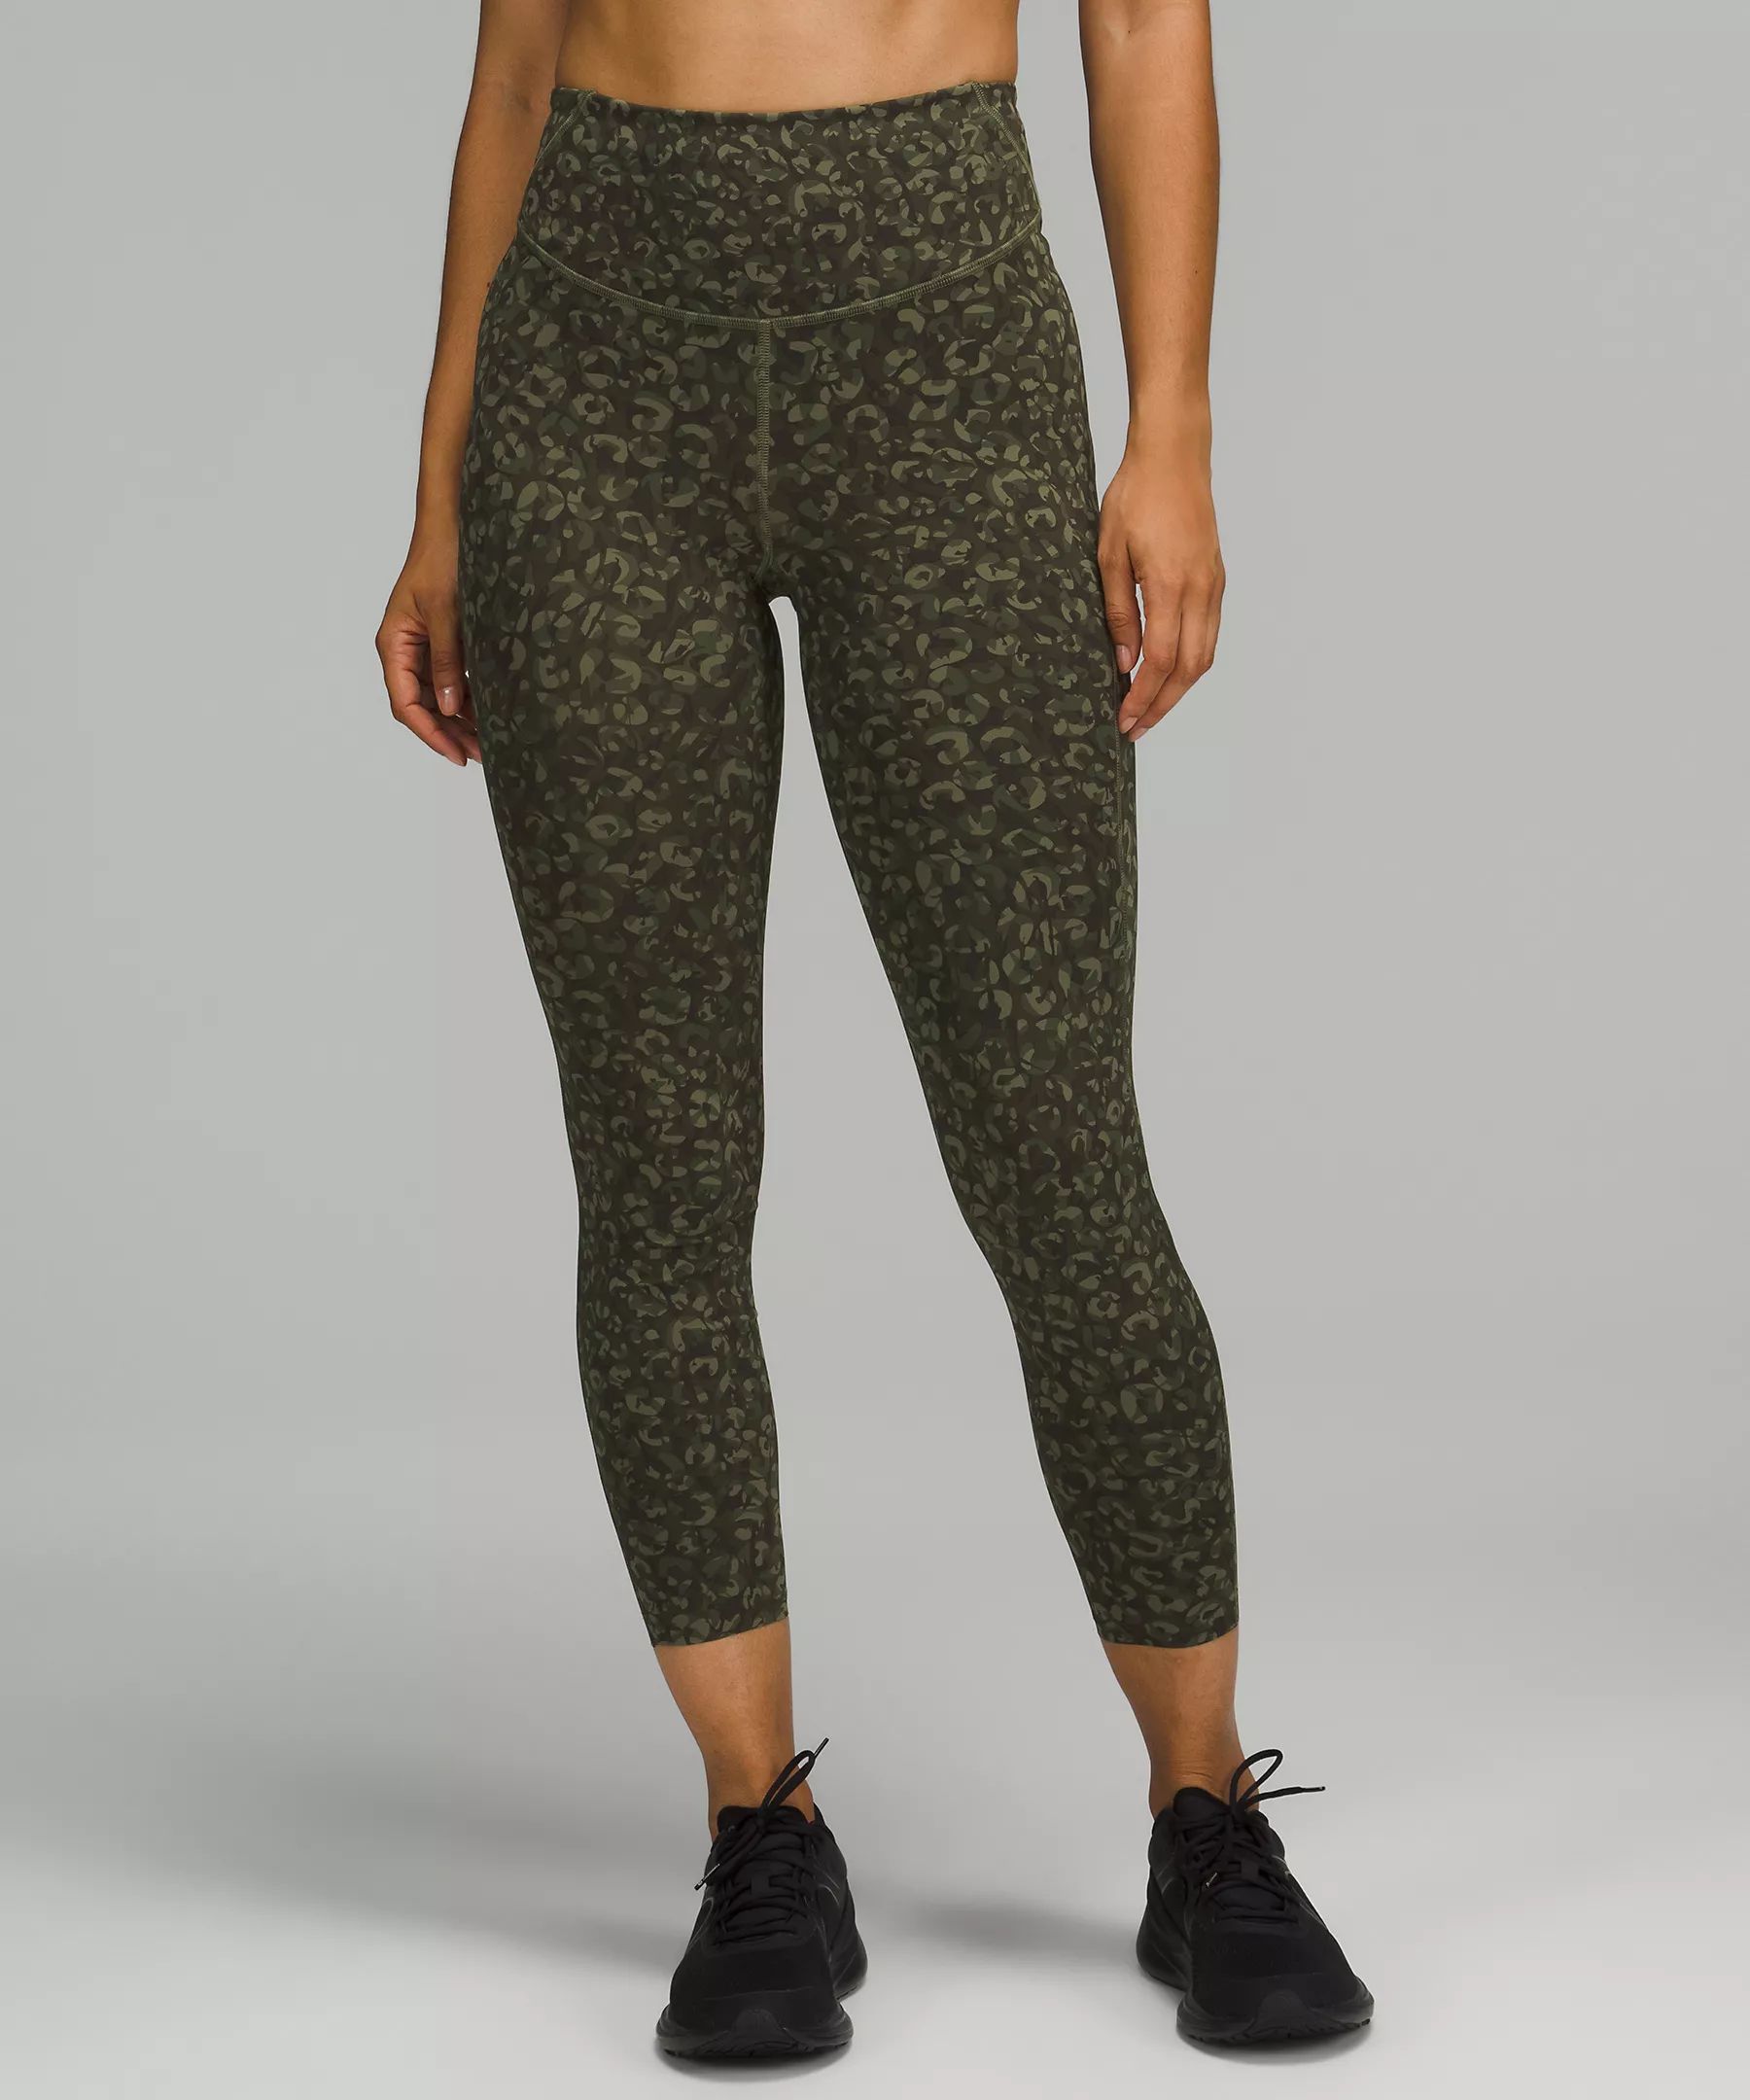 Base Pace High-Rise Running Tight 25" Online Only | Lululemon (US)